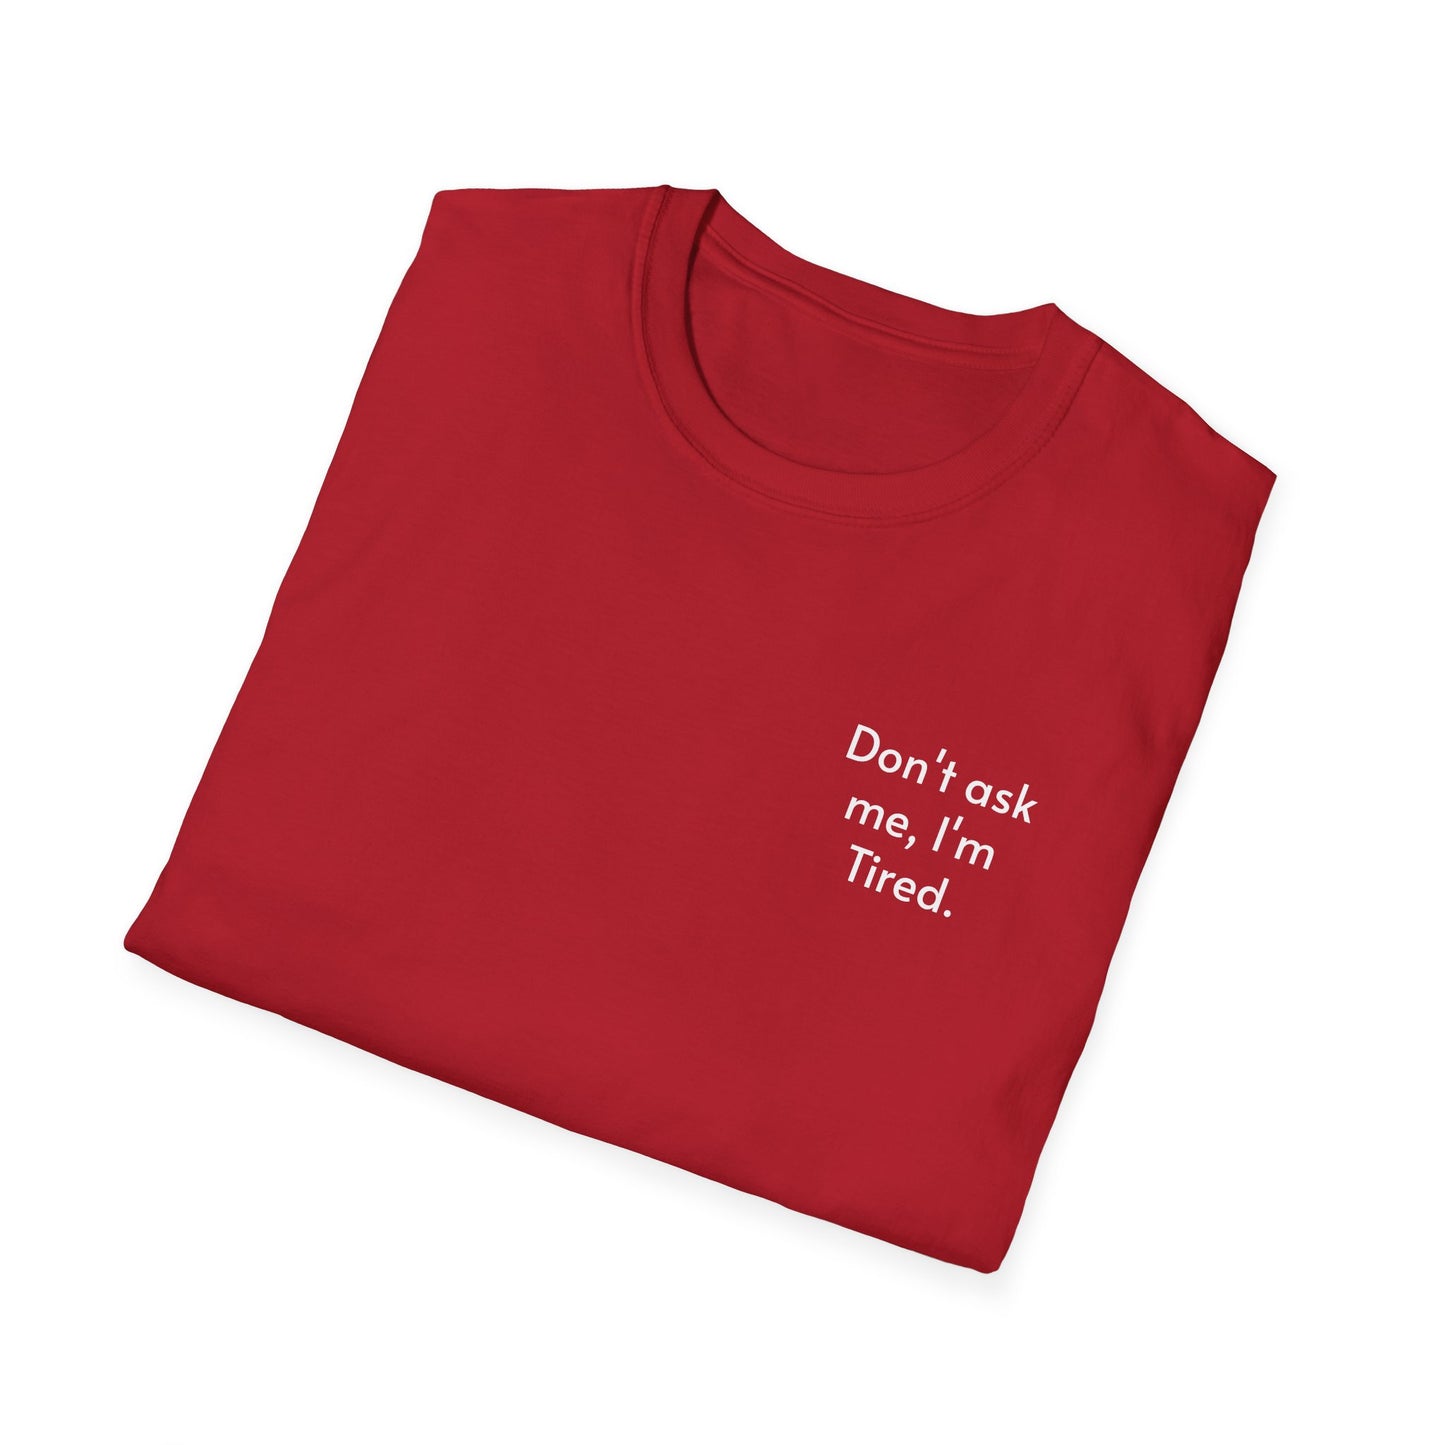 Don't ask me, I'm tired. T-shirt